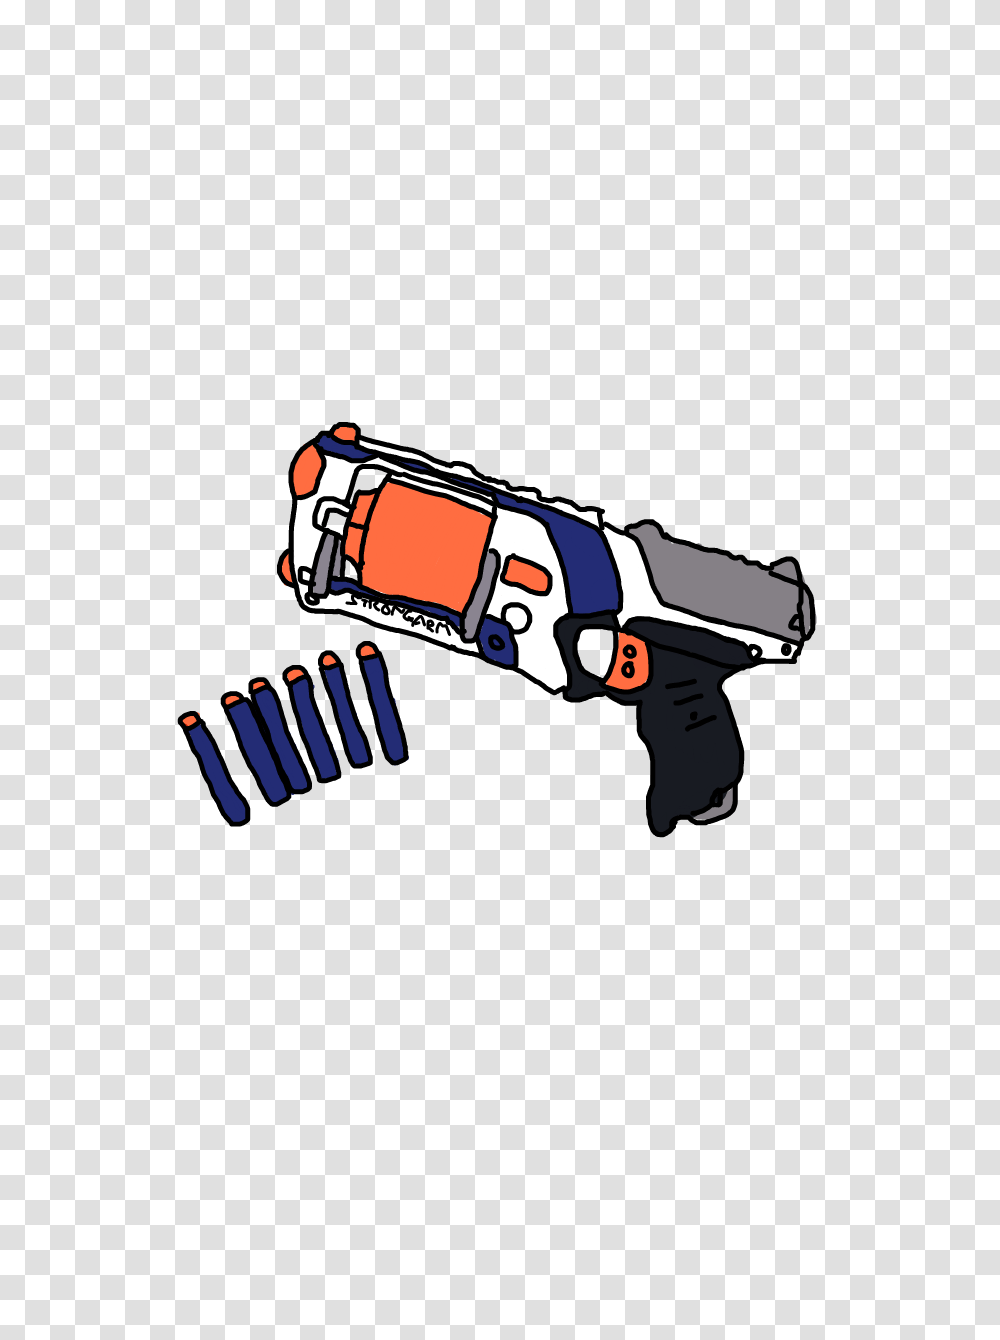 Popular And Trending Nerf Stickers, Weapon, Weaponry, Tool, Ammunition Transparent Png